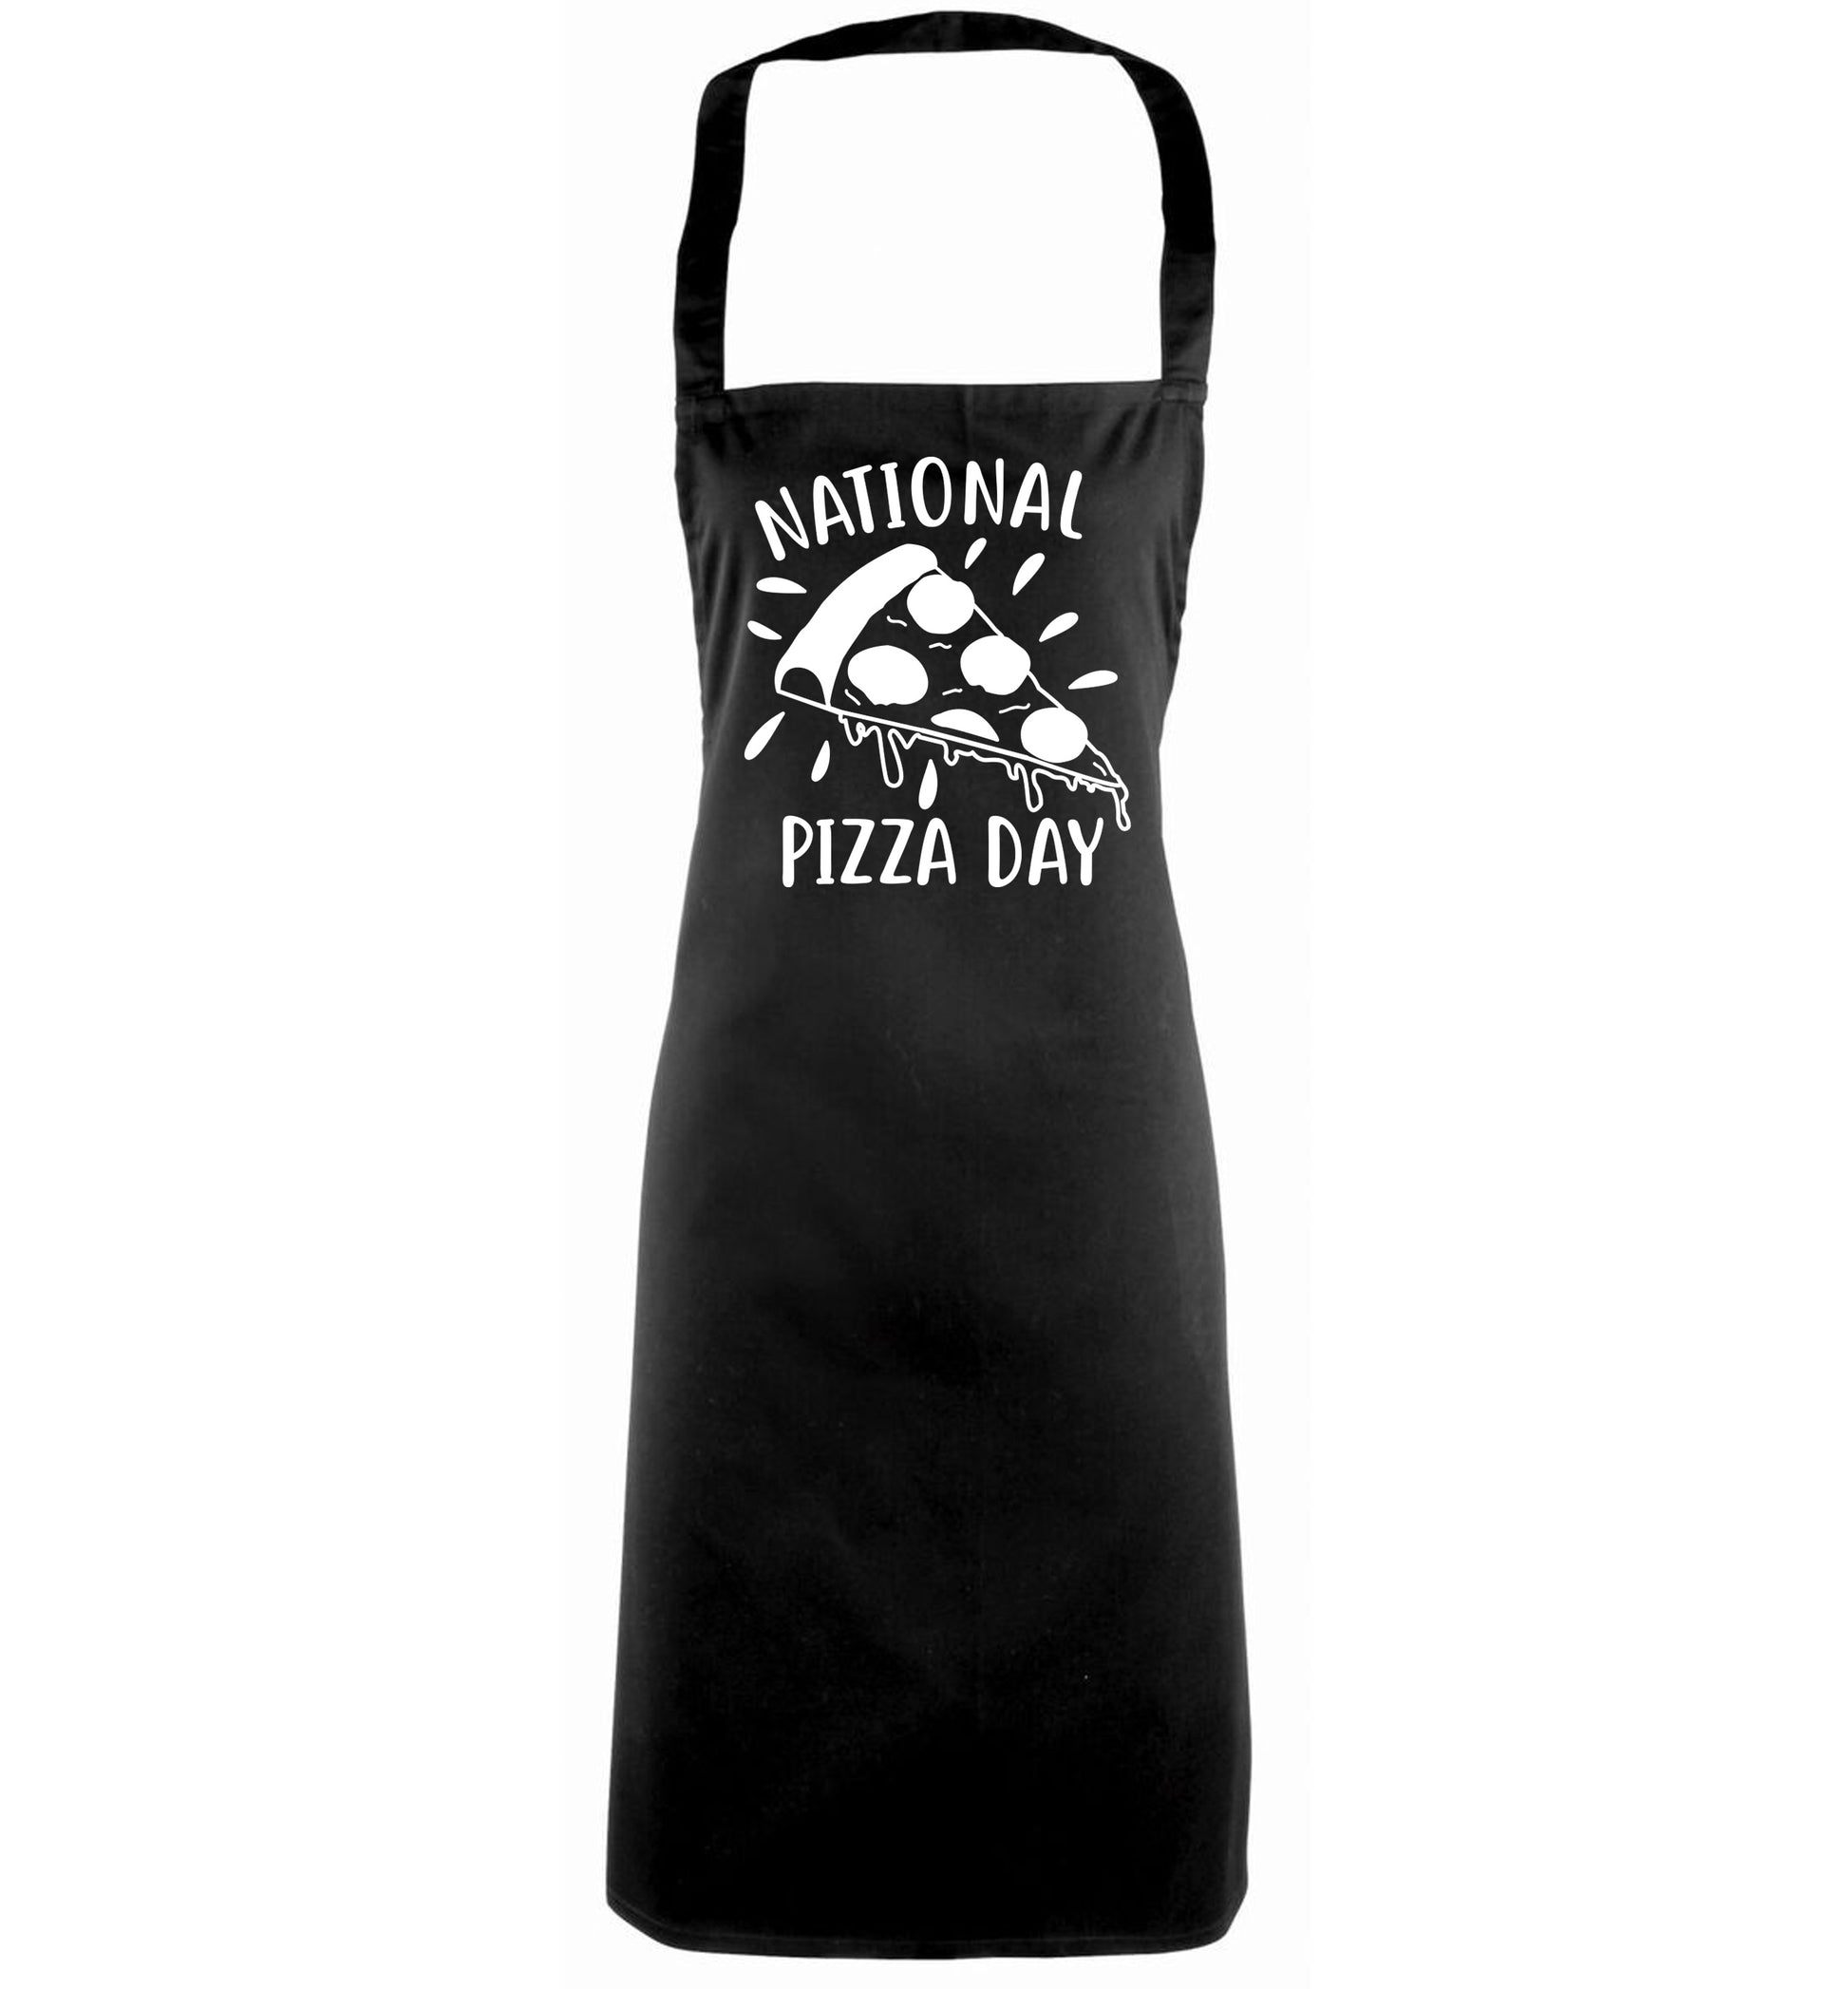 National pizza day black apron